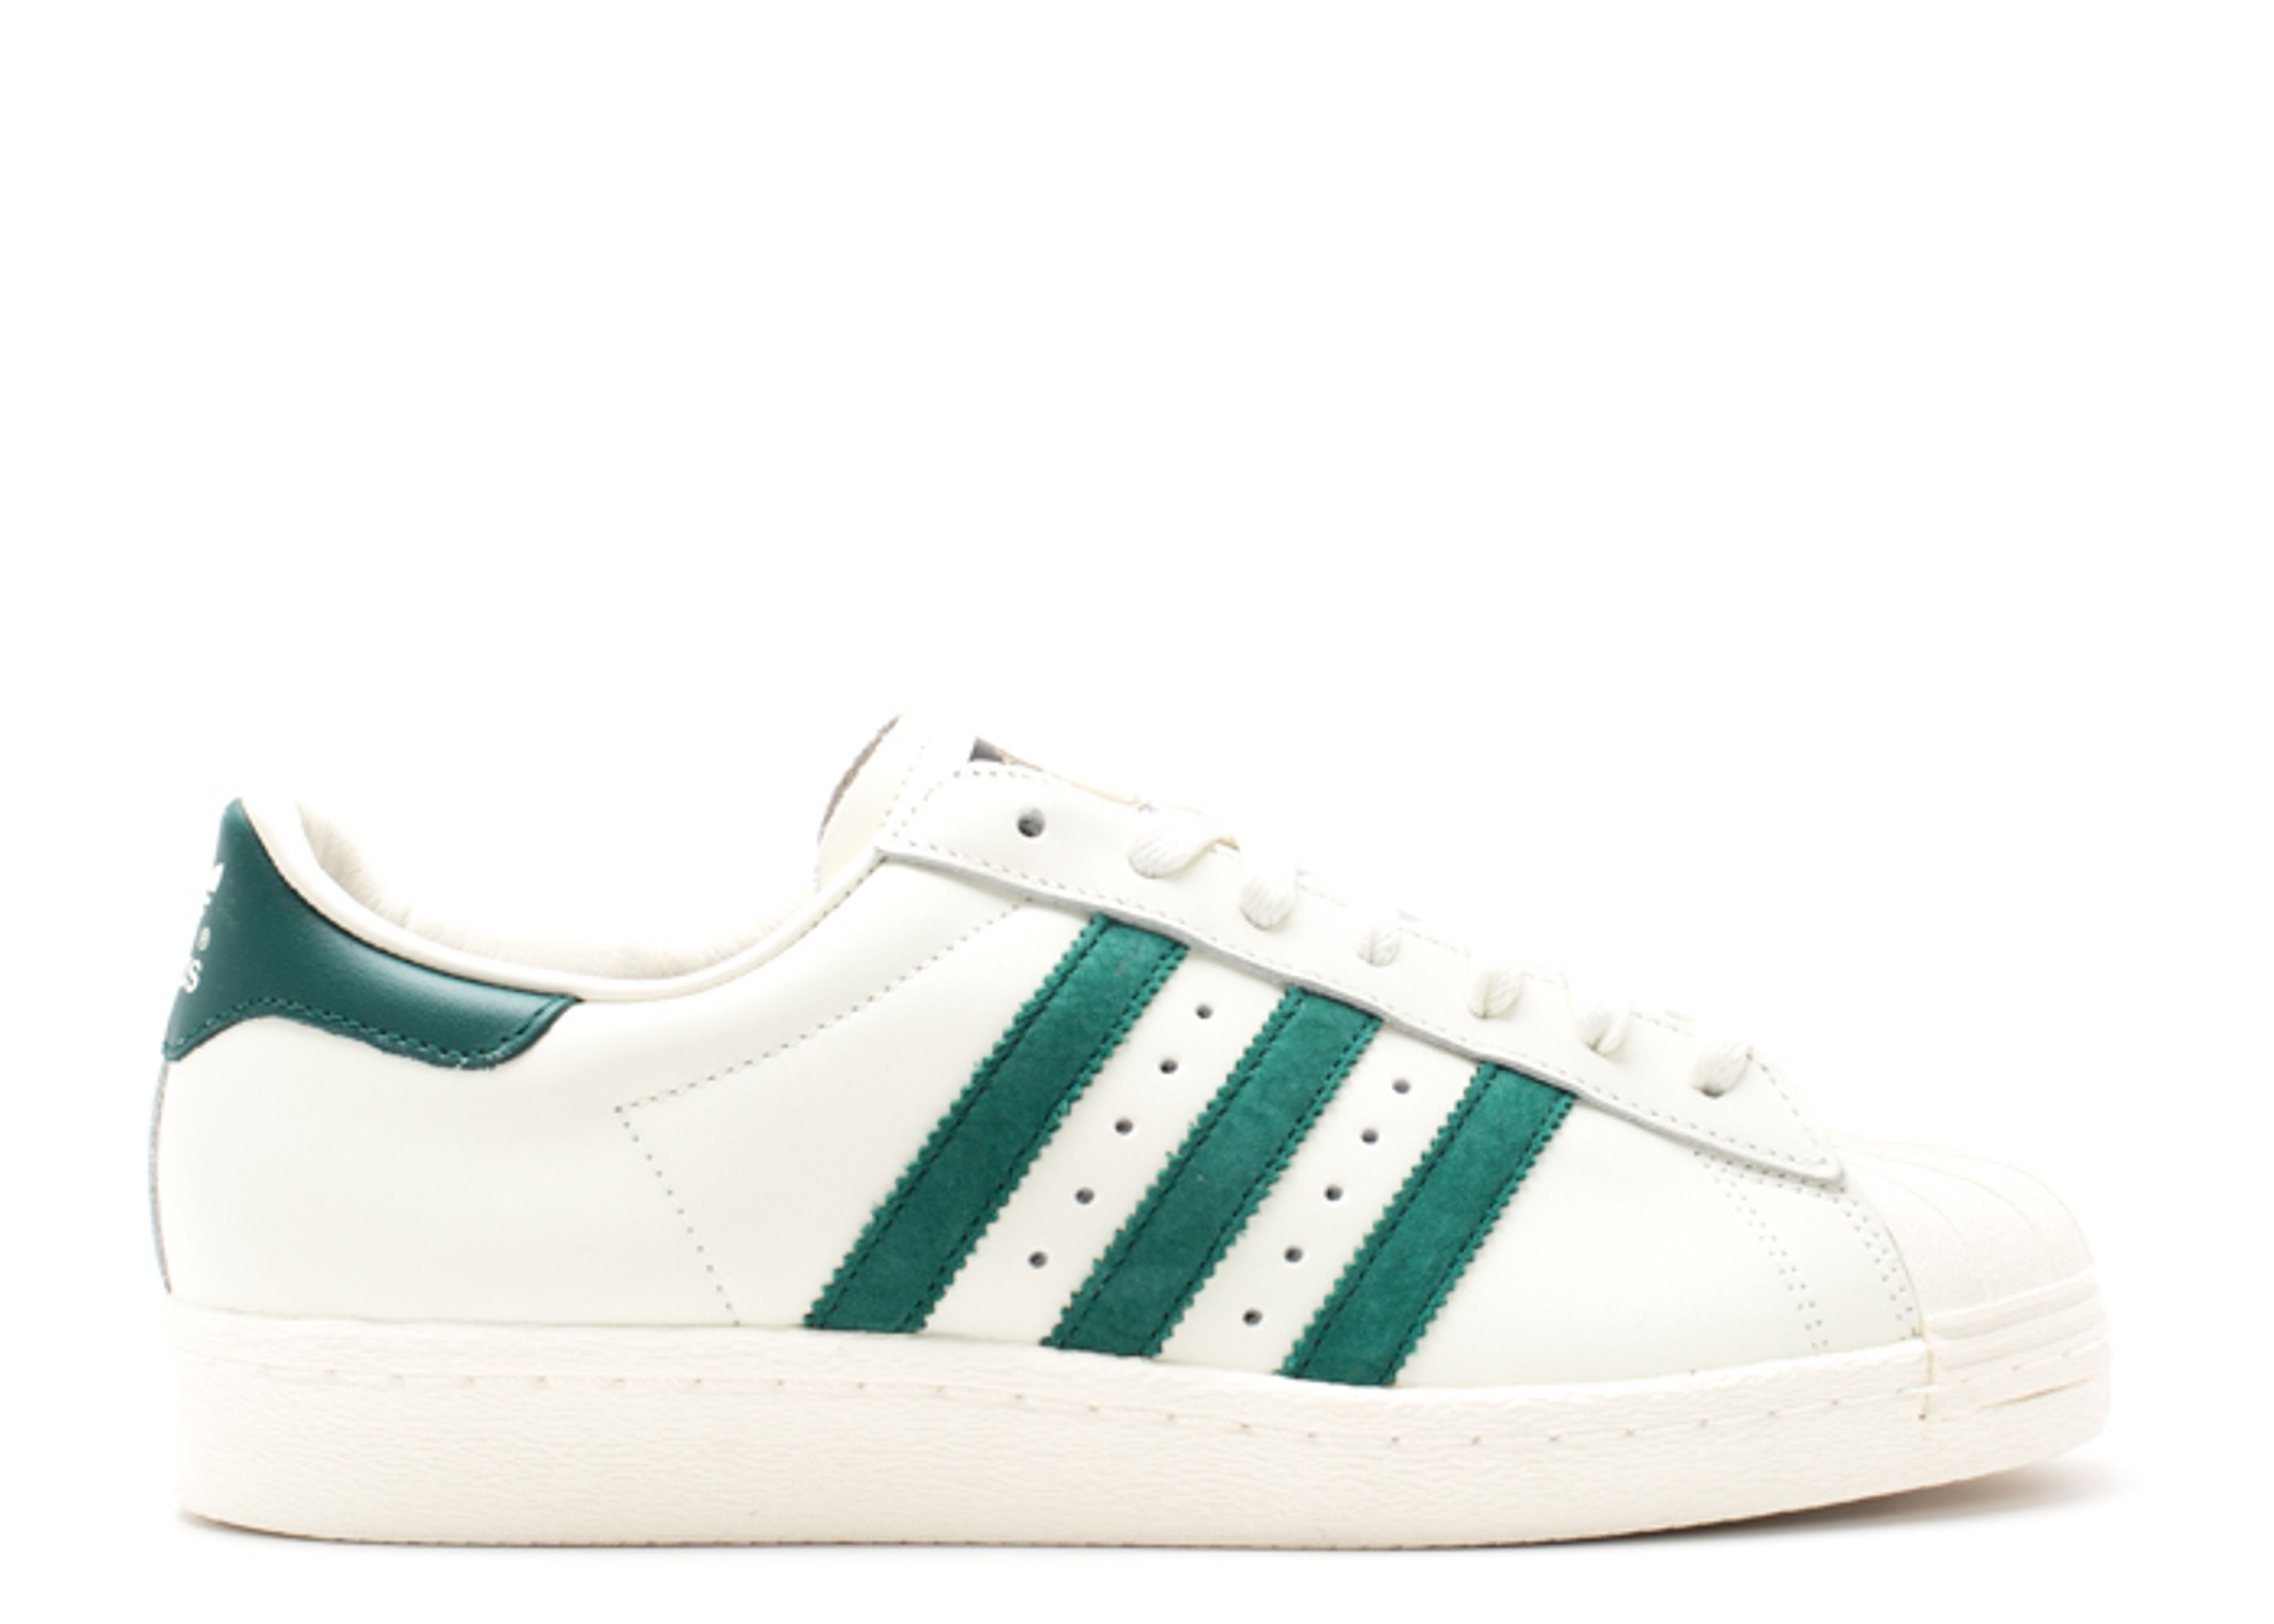 Superstar 80s Vintage Deluxe Shoes - Adidas - B35981 - vintage ...